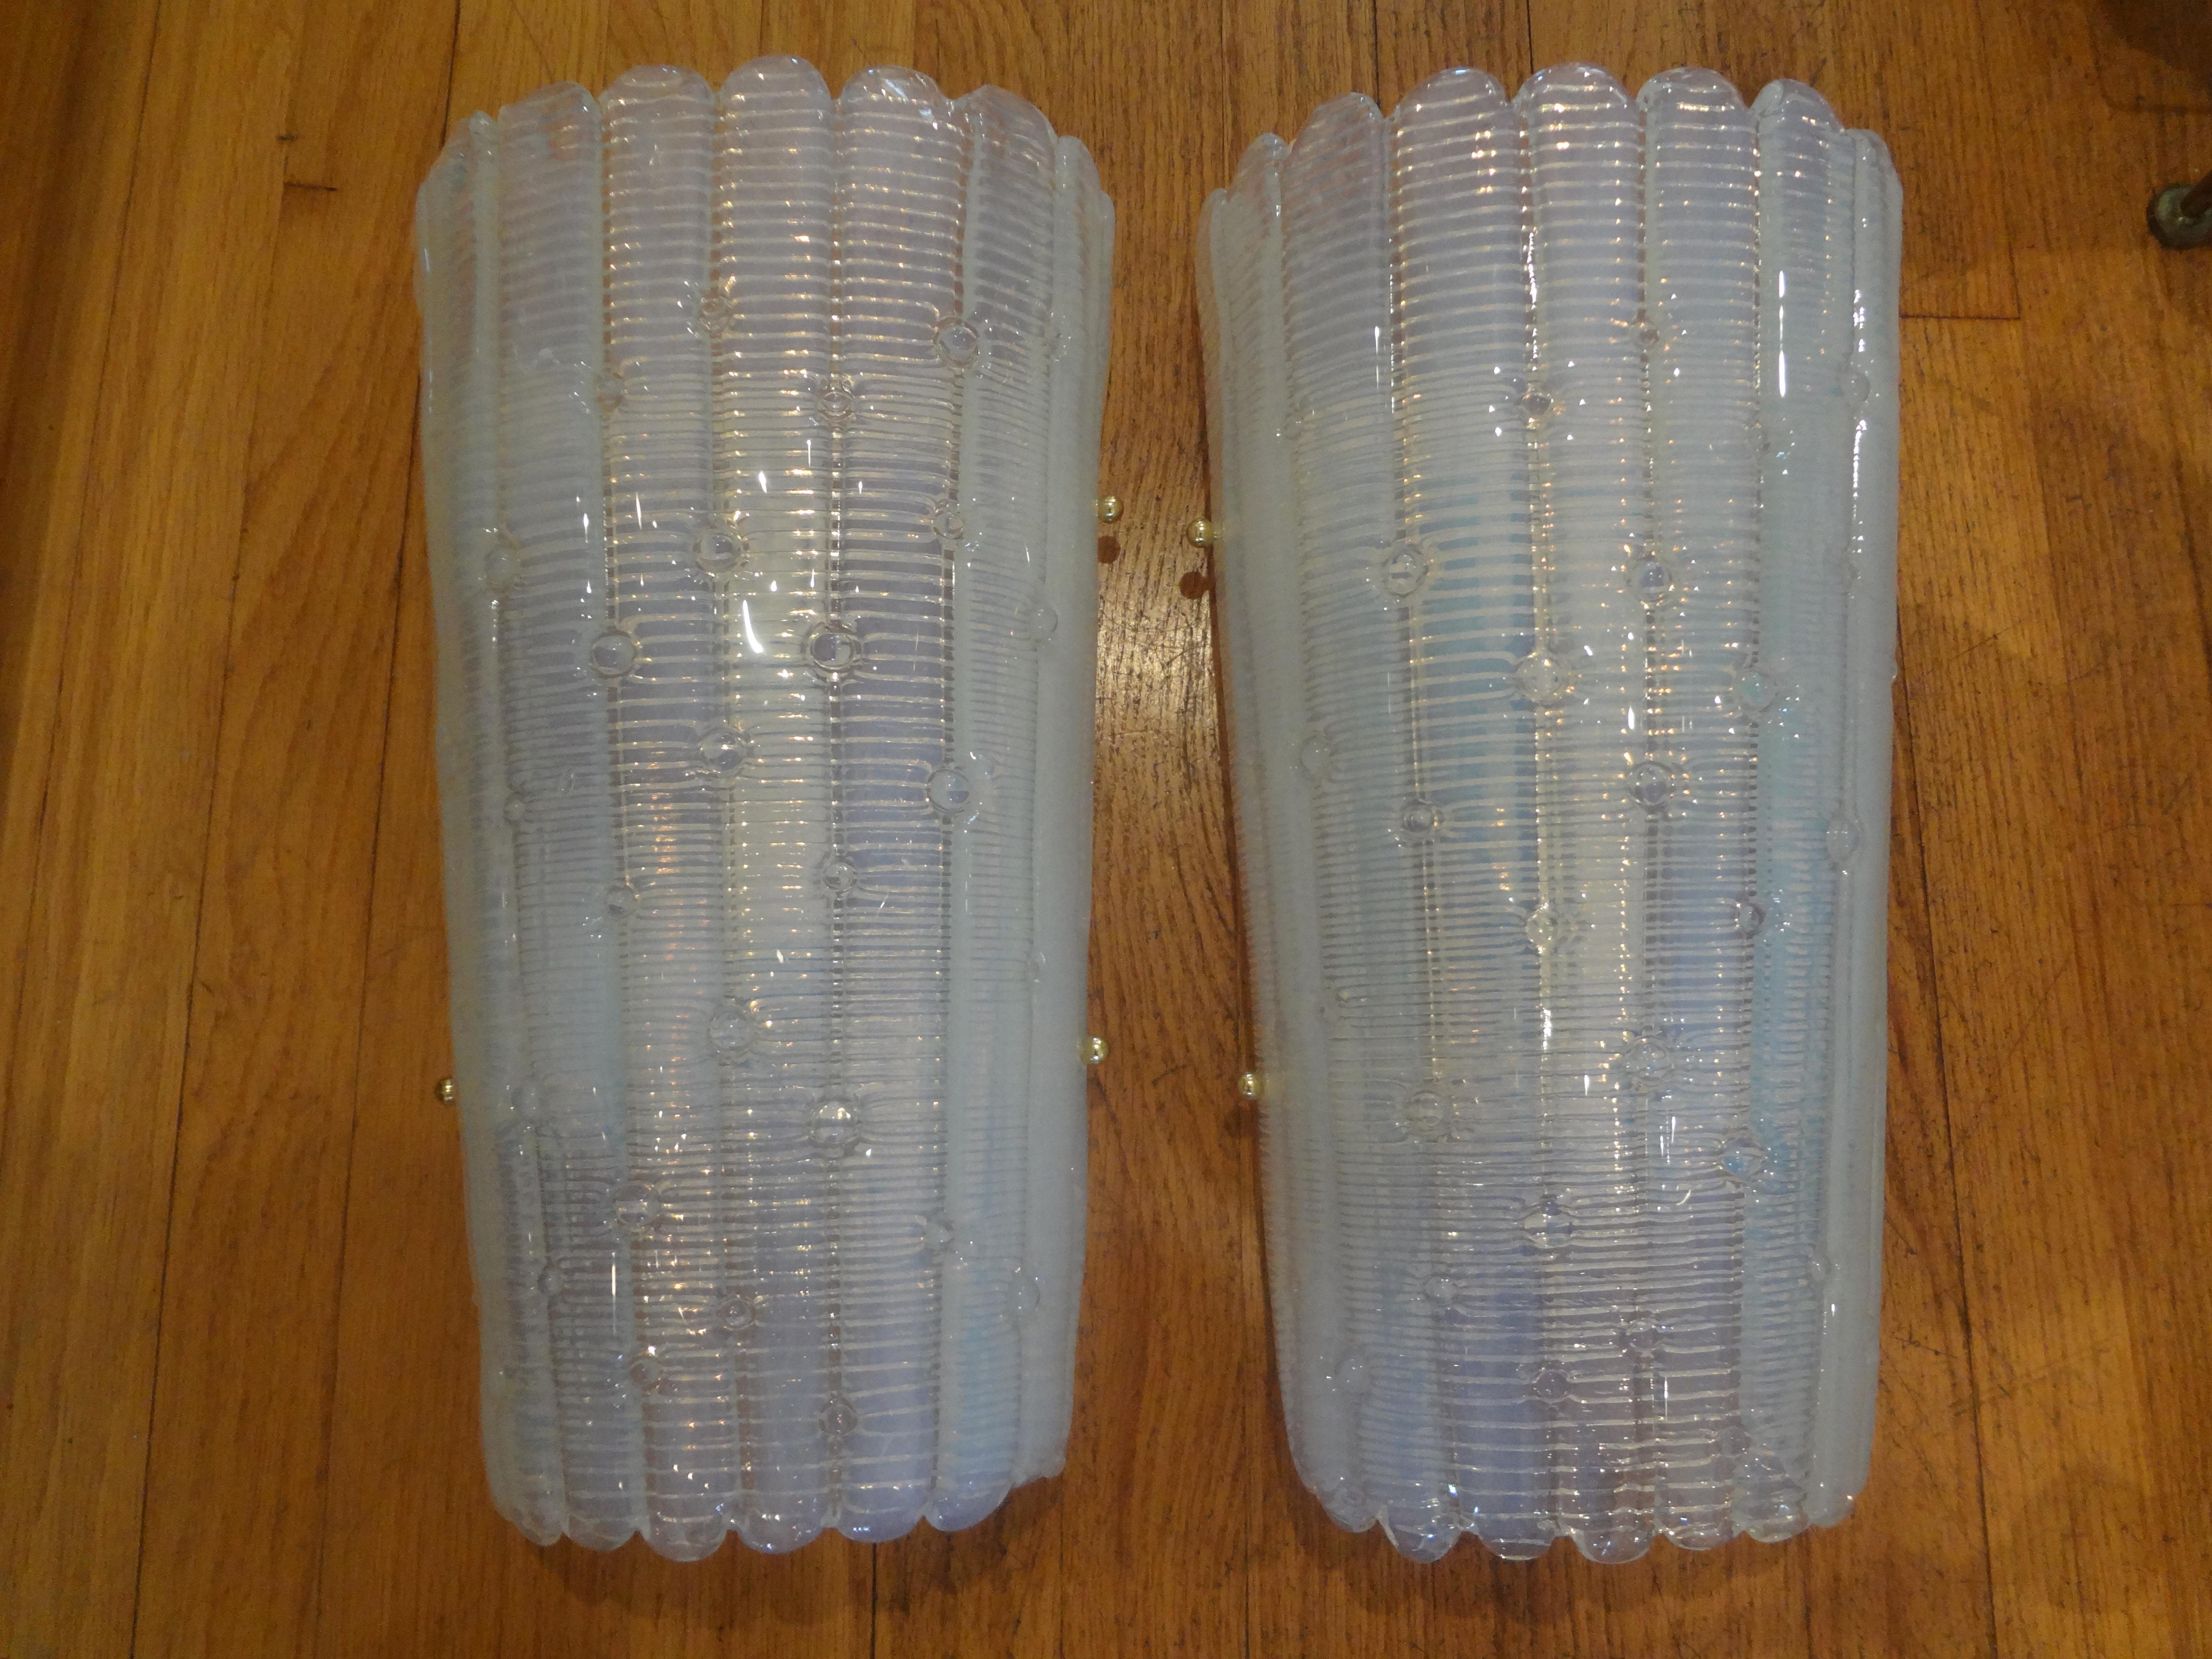 Stunning pair of vintage opalescent murano glass sconces. This large pair of Barovier style murano glass sconces have a beautiful ribbed effect with raised points. These gorgeous modernist murano glass sconces each have two Edison sockets and have